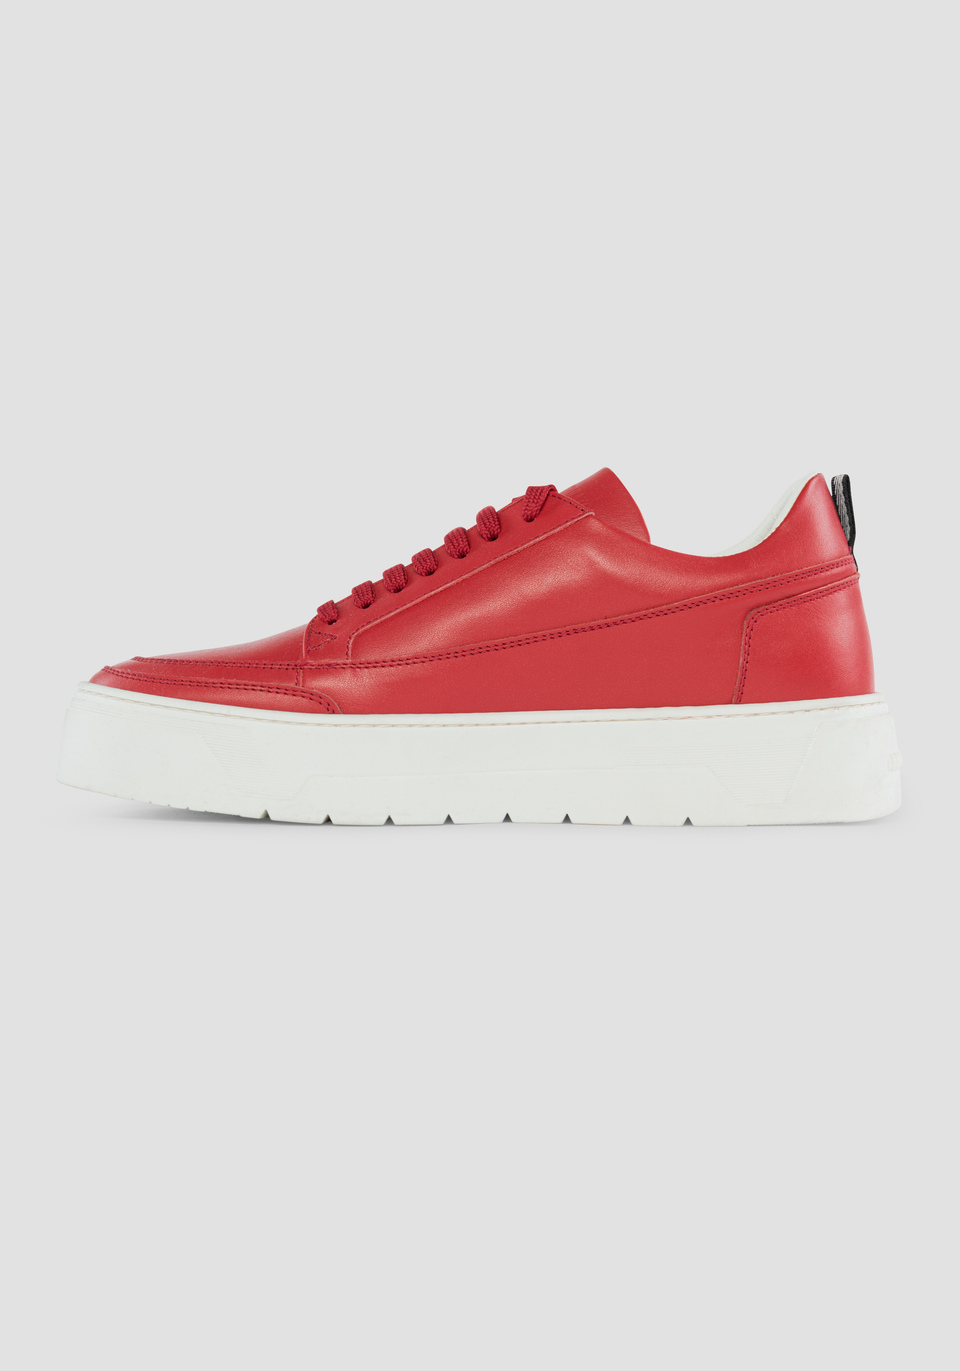 "FLINT" LOW-TOP SNEAKERS IN LEATHER WITH TONE-ON-TONE DETAILS - Antony Morato Online Shop